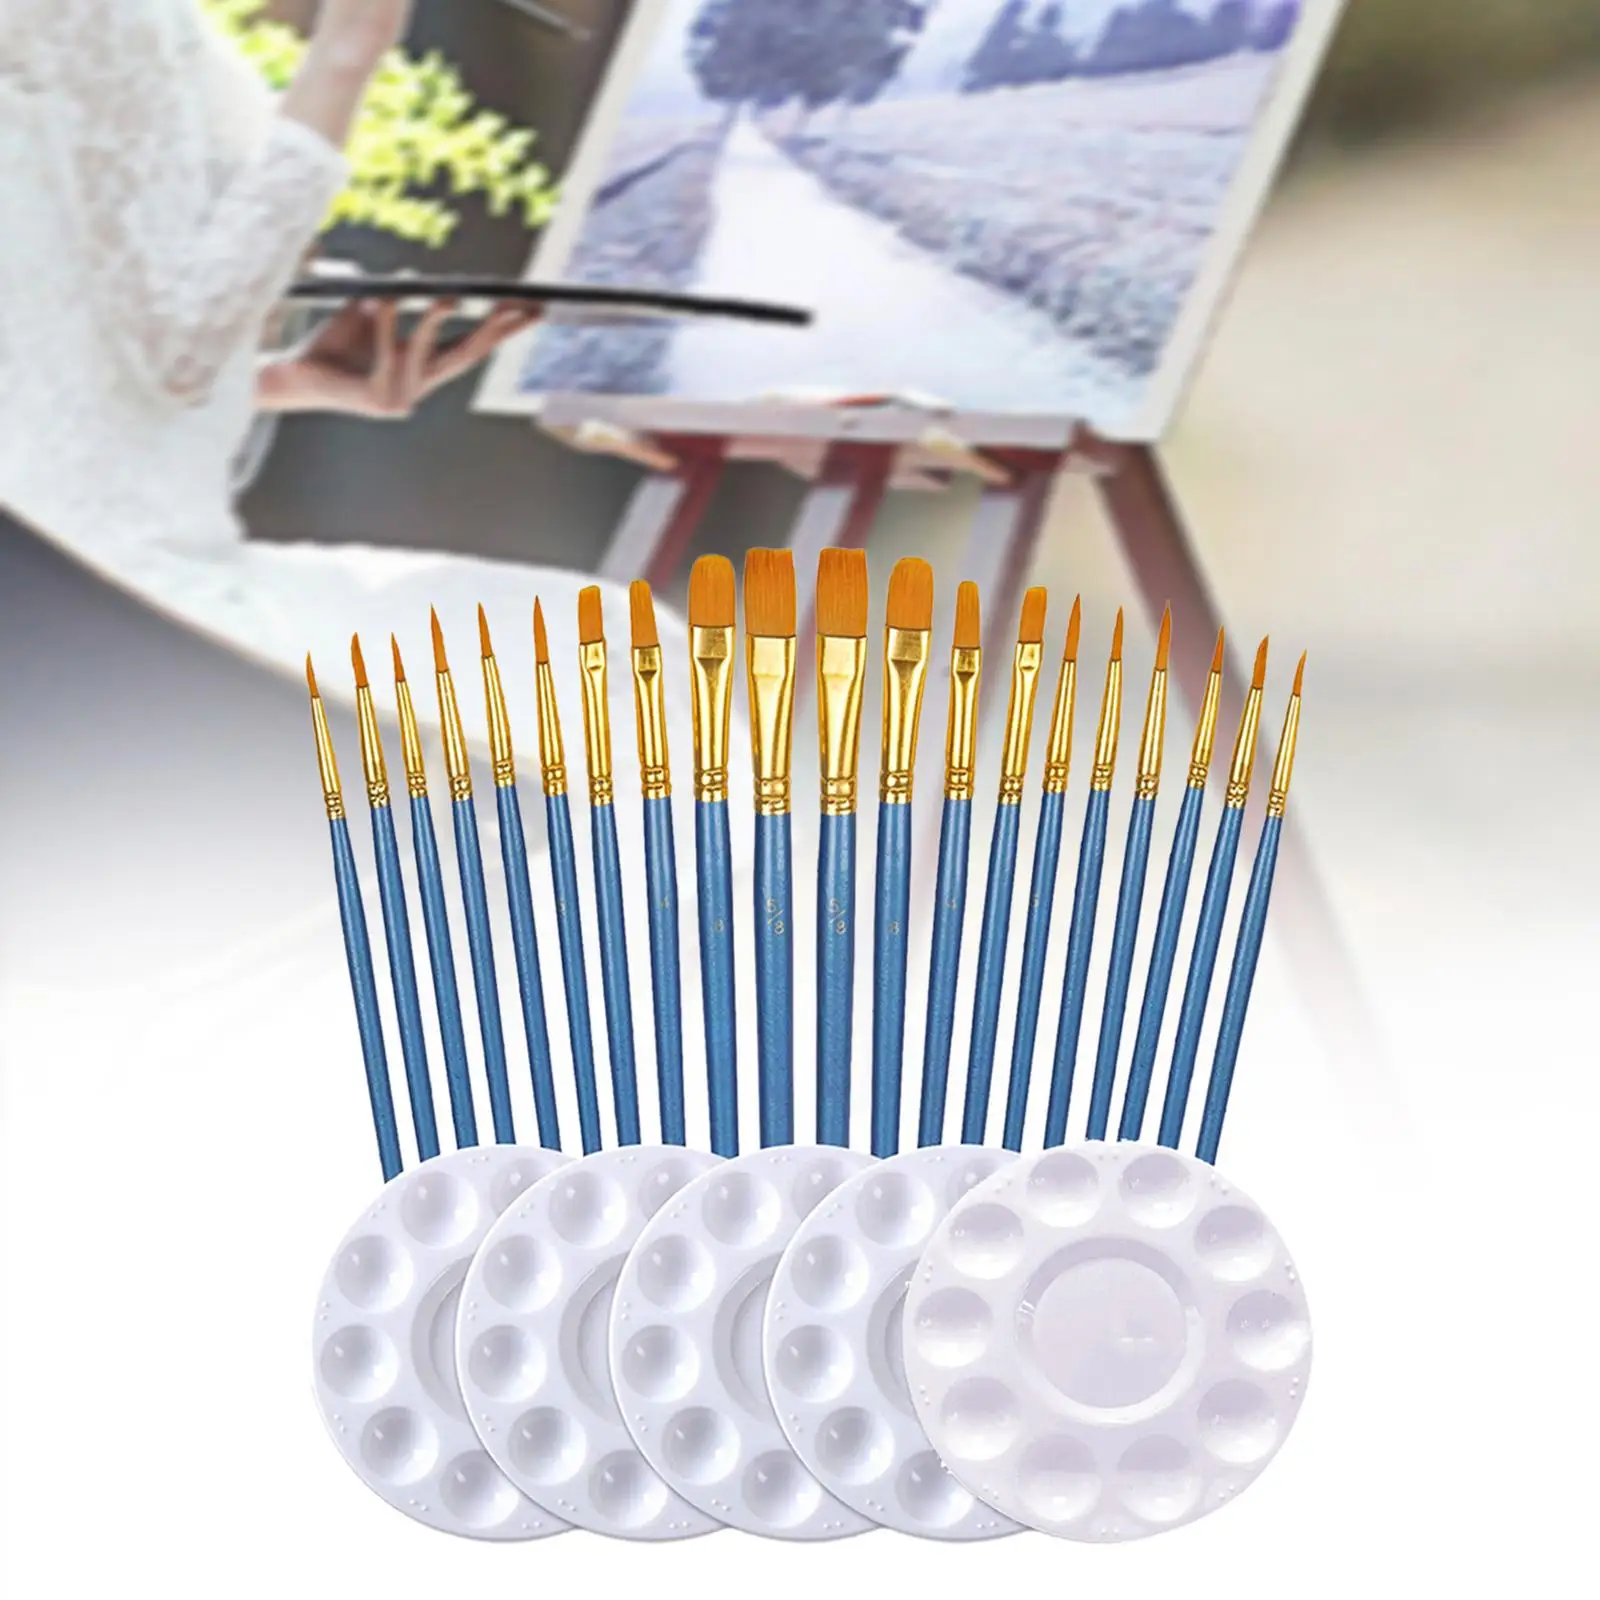 25x Nylon Hair Brushes Drawing Long Wooden Handle Art Supplies Paint Brushes Palette Set Acrylic Painting for Wall Arts Projects